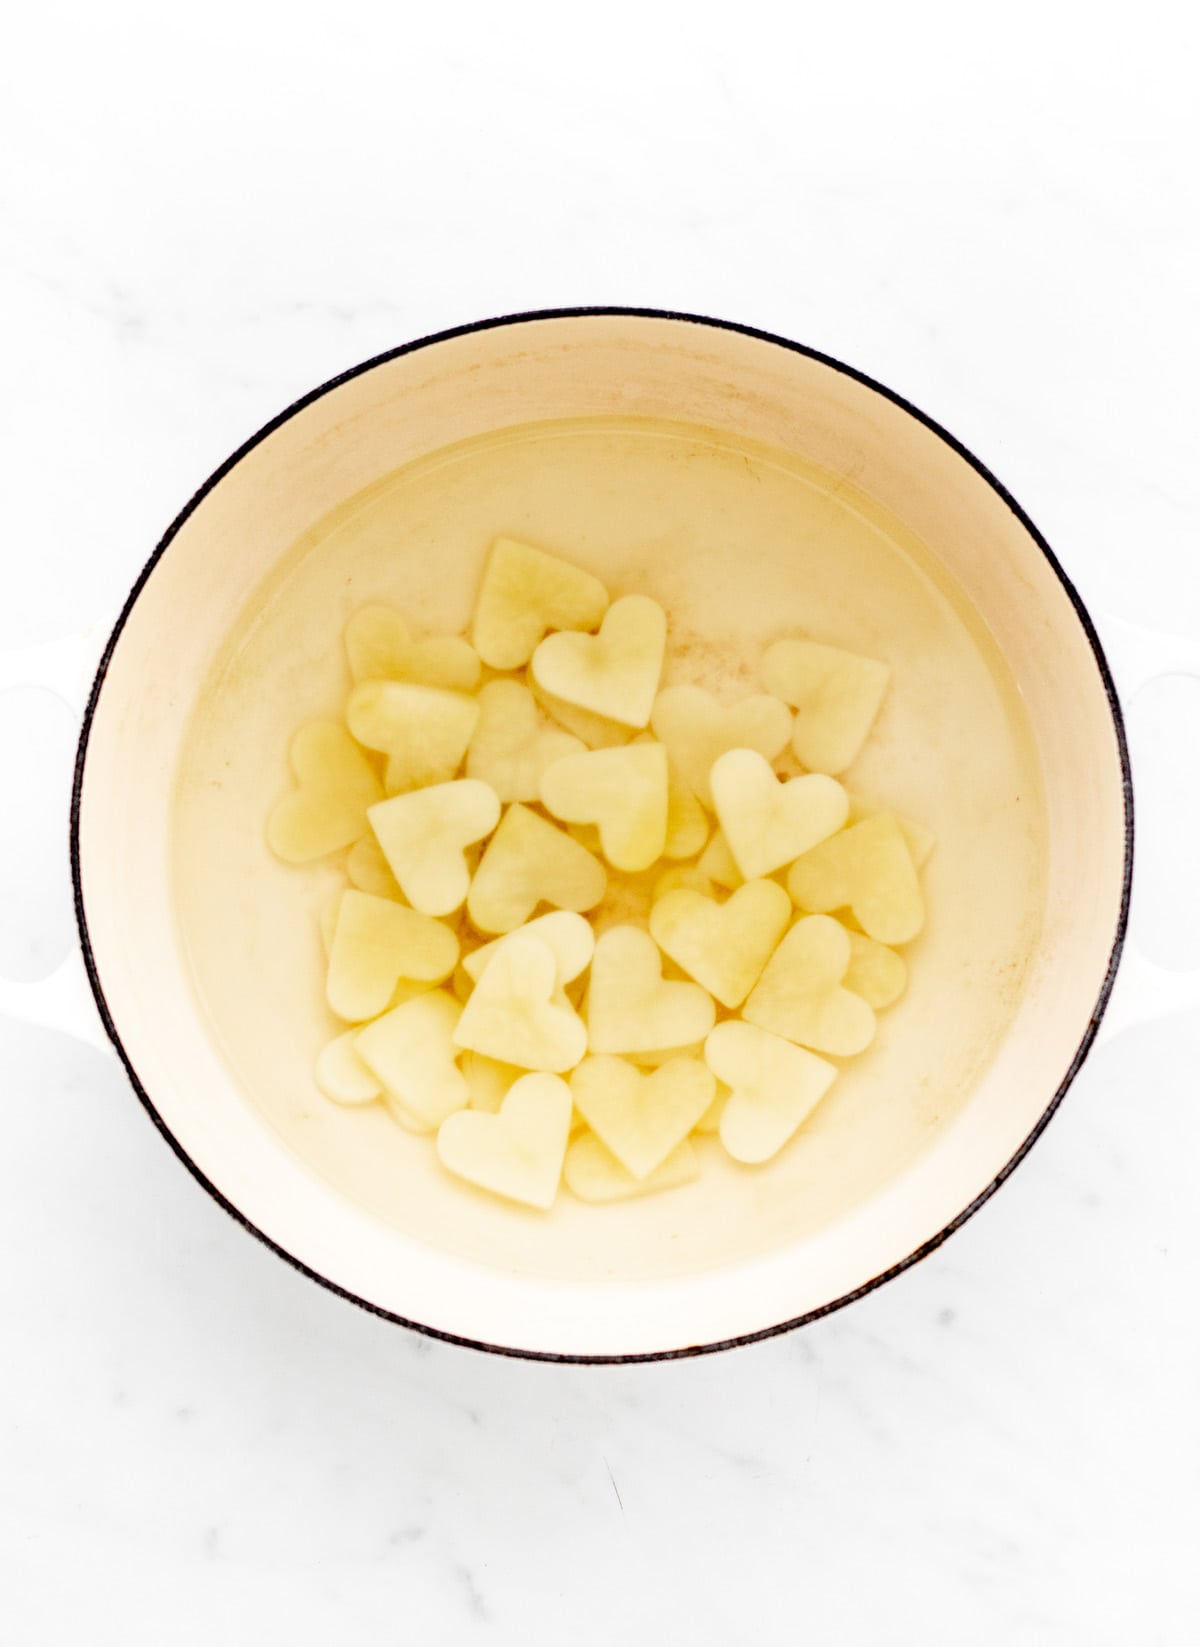 Potatoes cut into heart shapes and parboiled in a pot of water before baking.